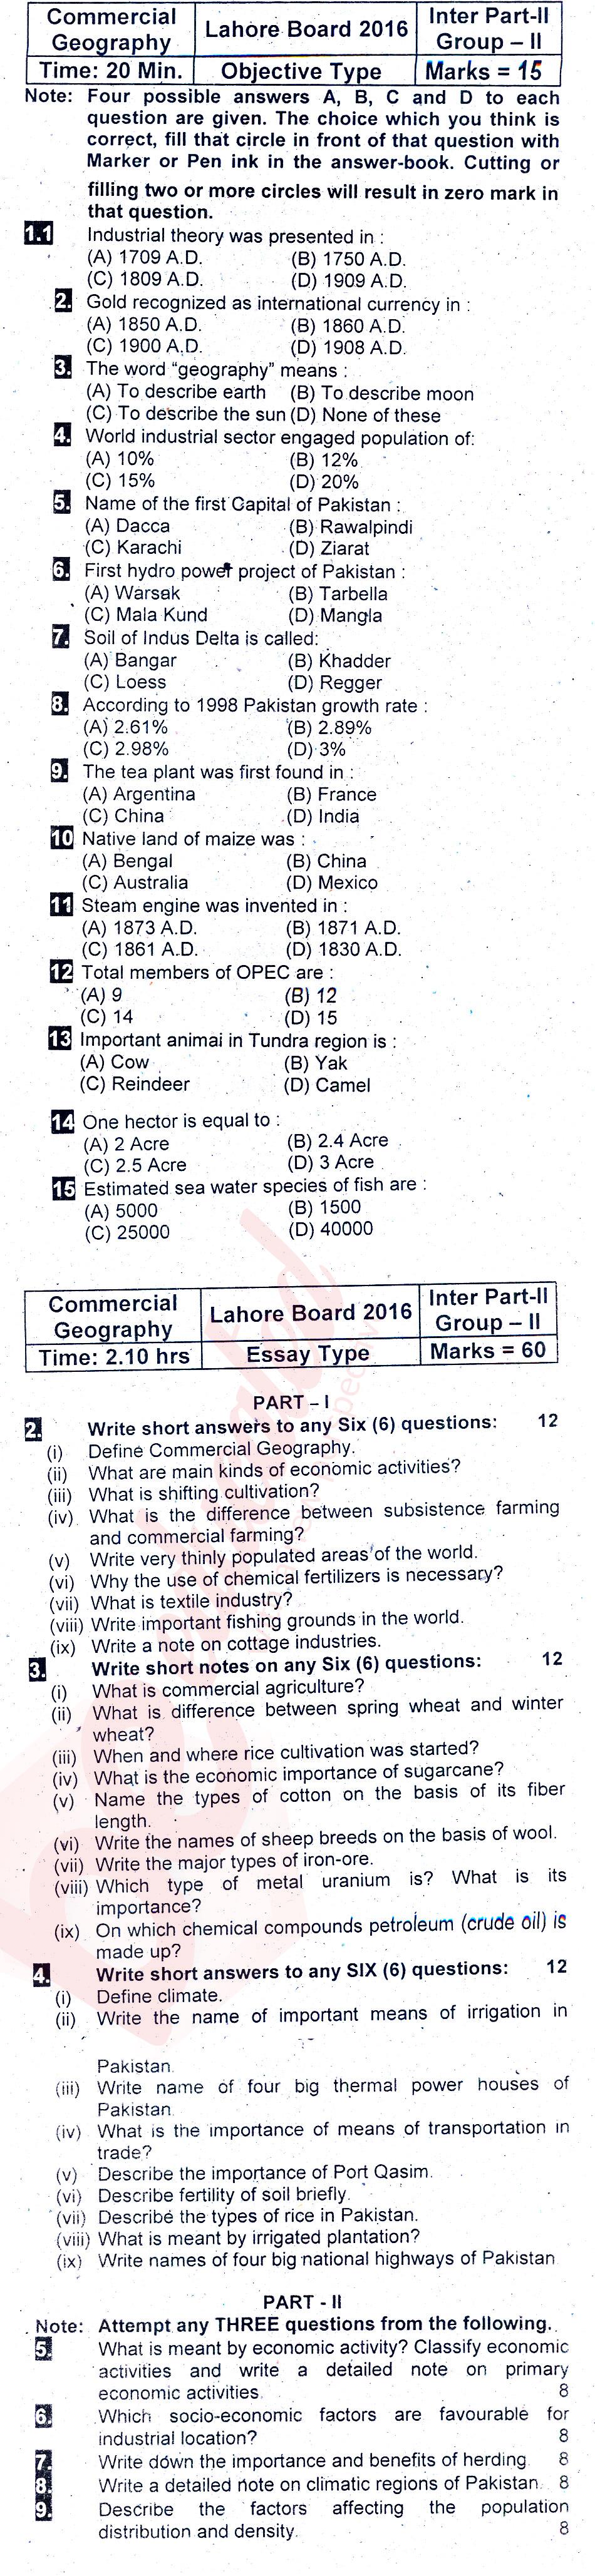 Commercial Geography ICOM Part 2 Past Paper Group 2 BISE Lahore 2016